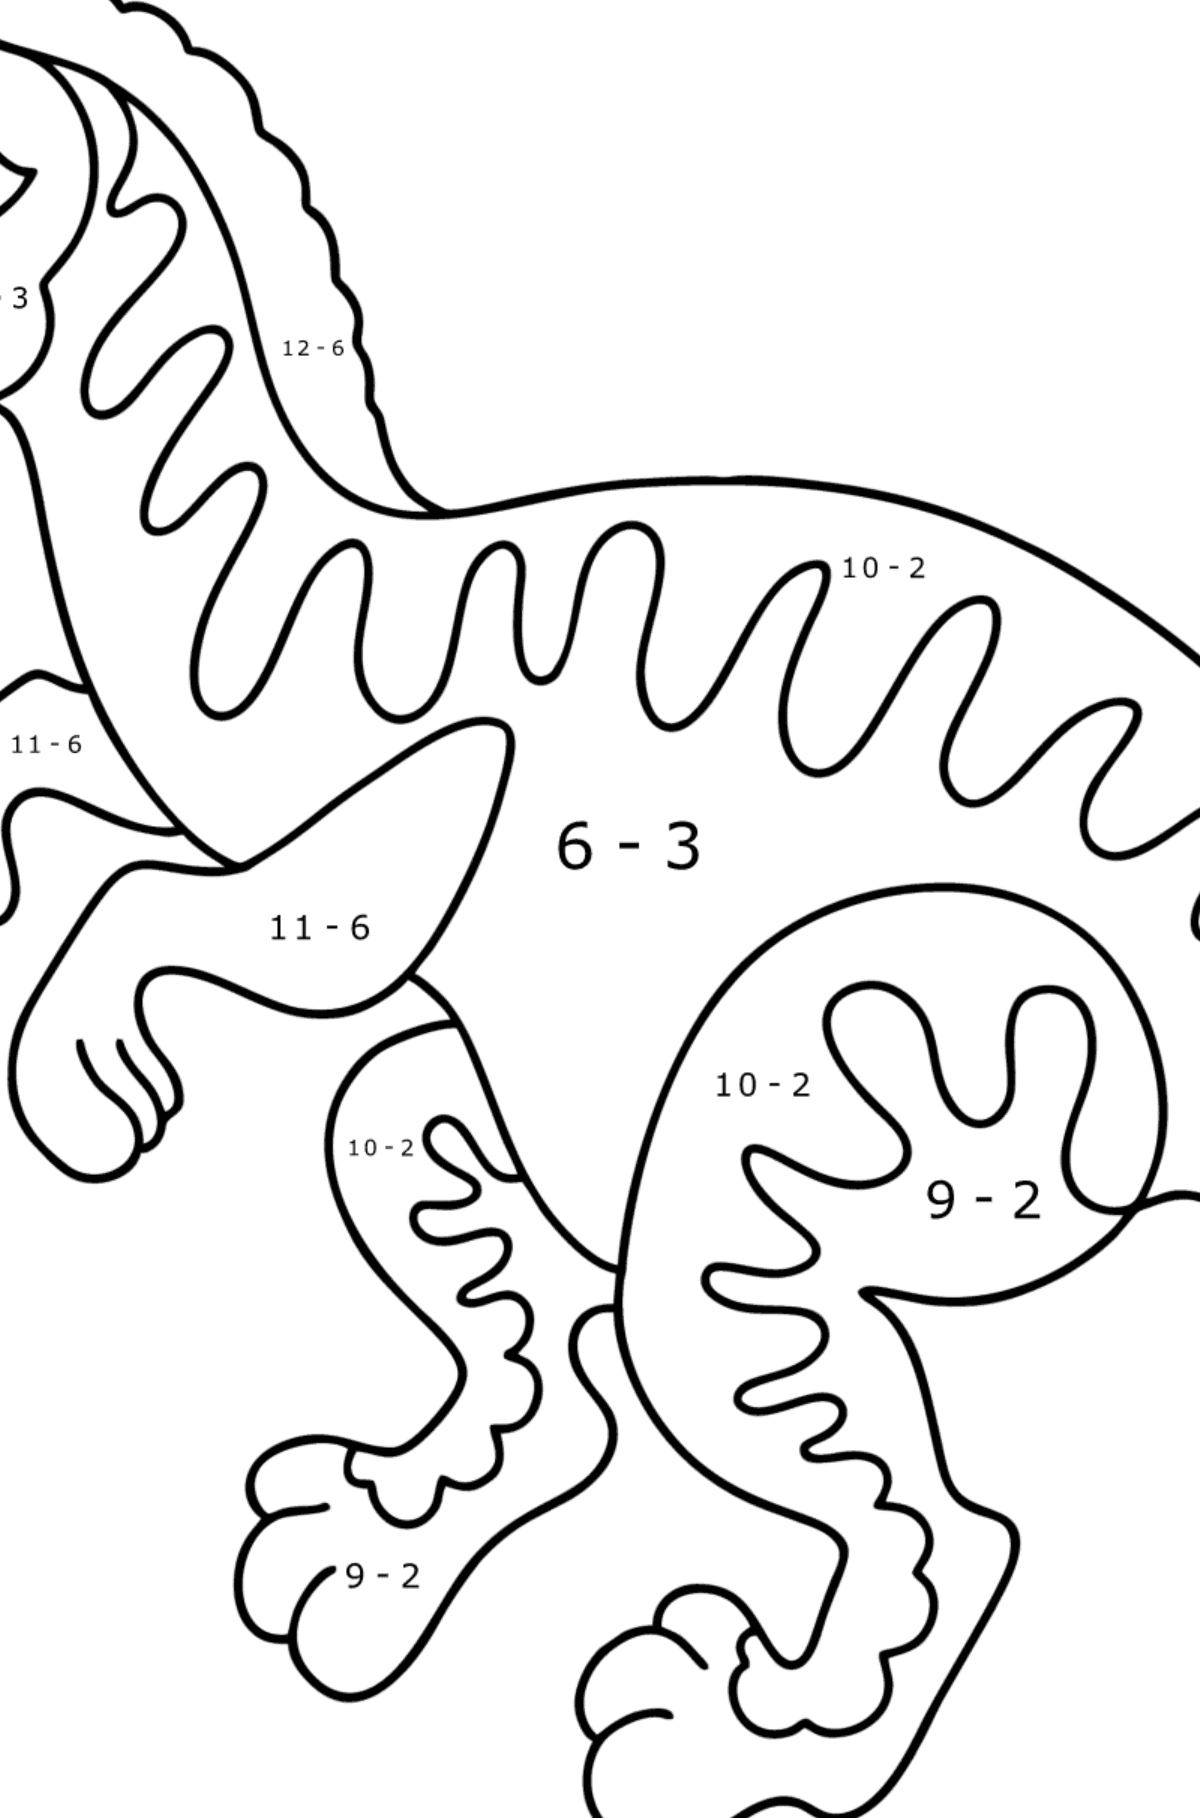 Velociraptor coloring page - Math Coloring - Subtraction for Kids